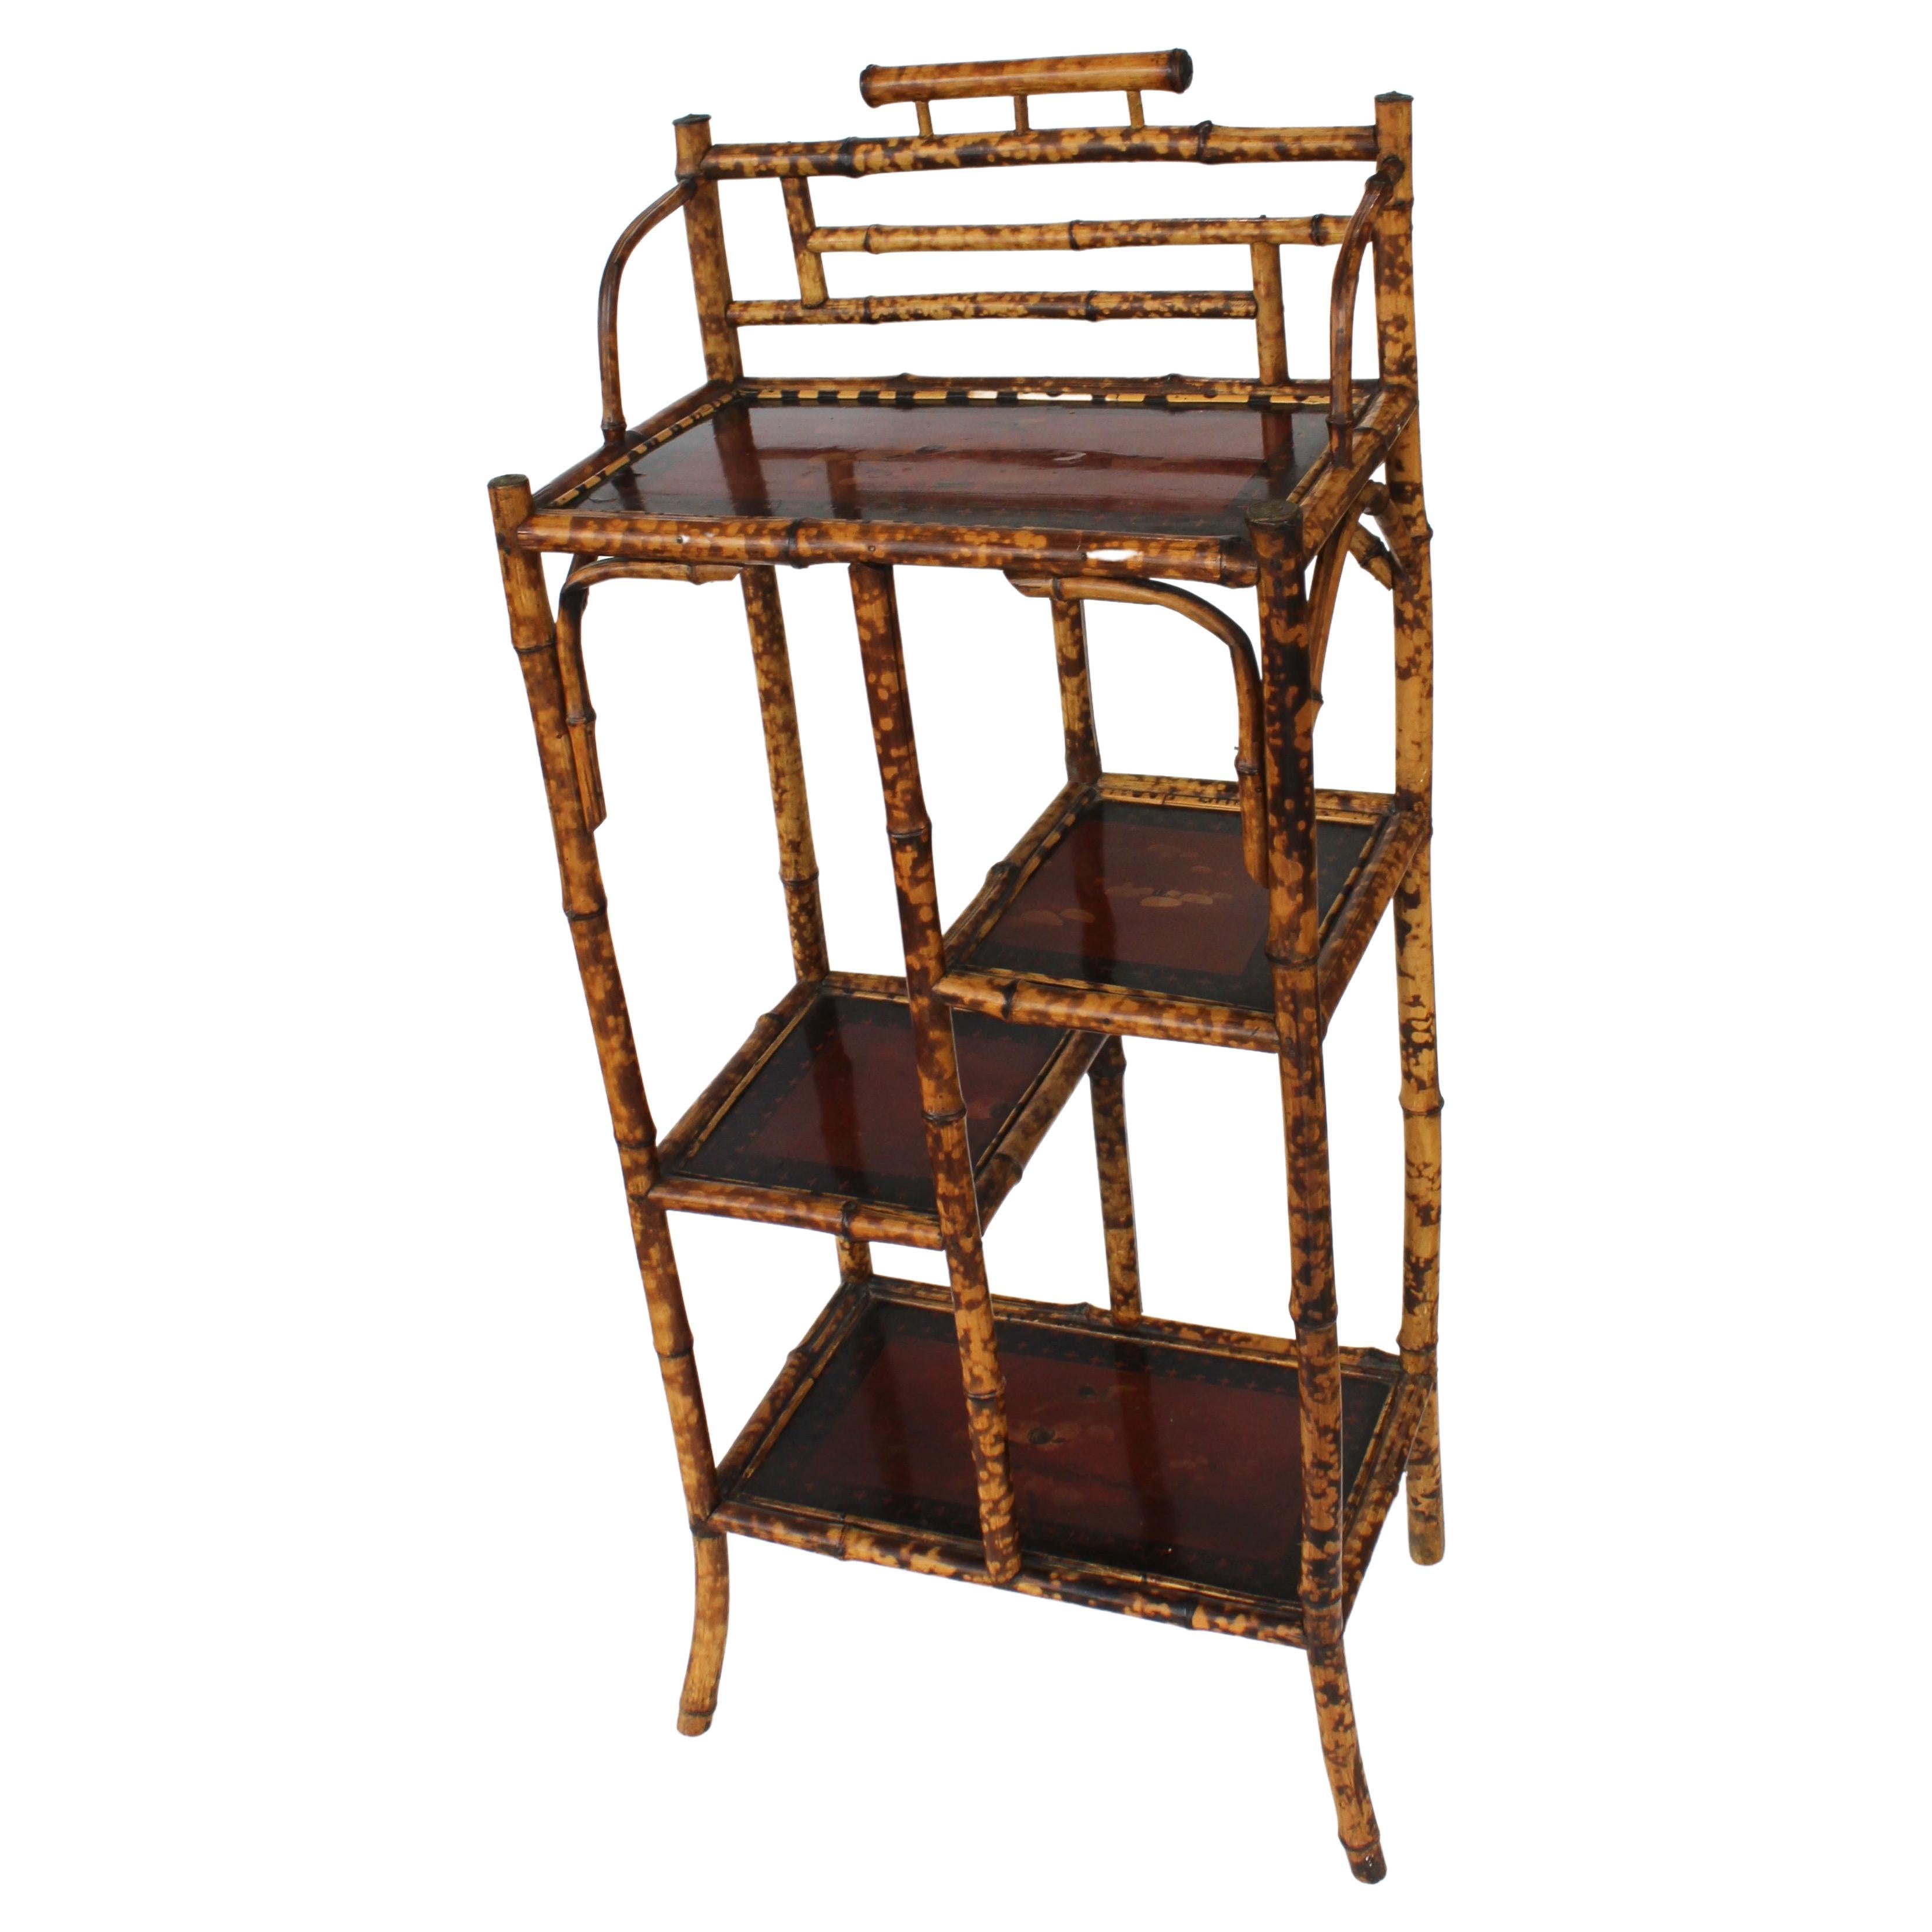 This stylish and chic Edwardian period etagere dates to the 1880s-1910s and is in the Japonais style, with its tortoise bamboo and lacquered panels detailed with blooming cherry trees and exotic birds.